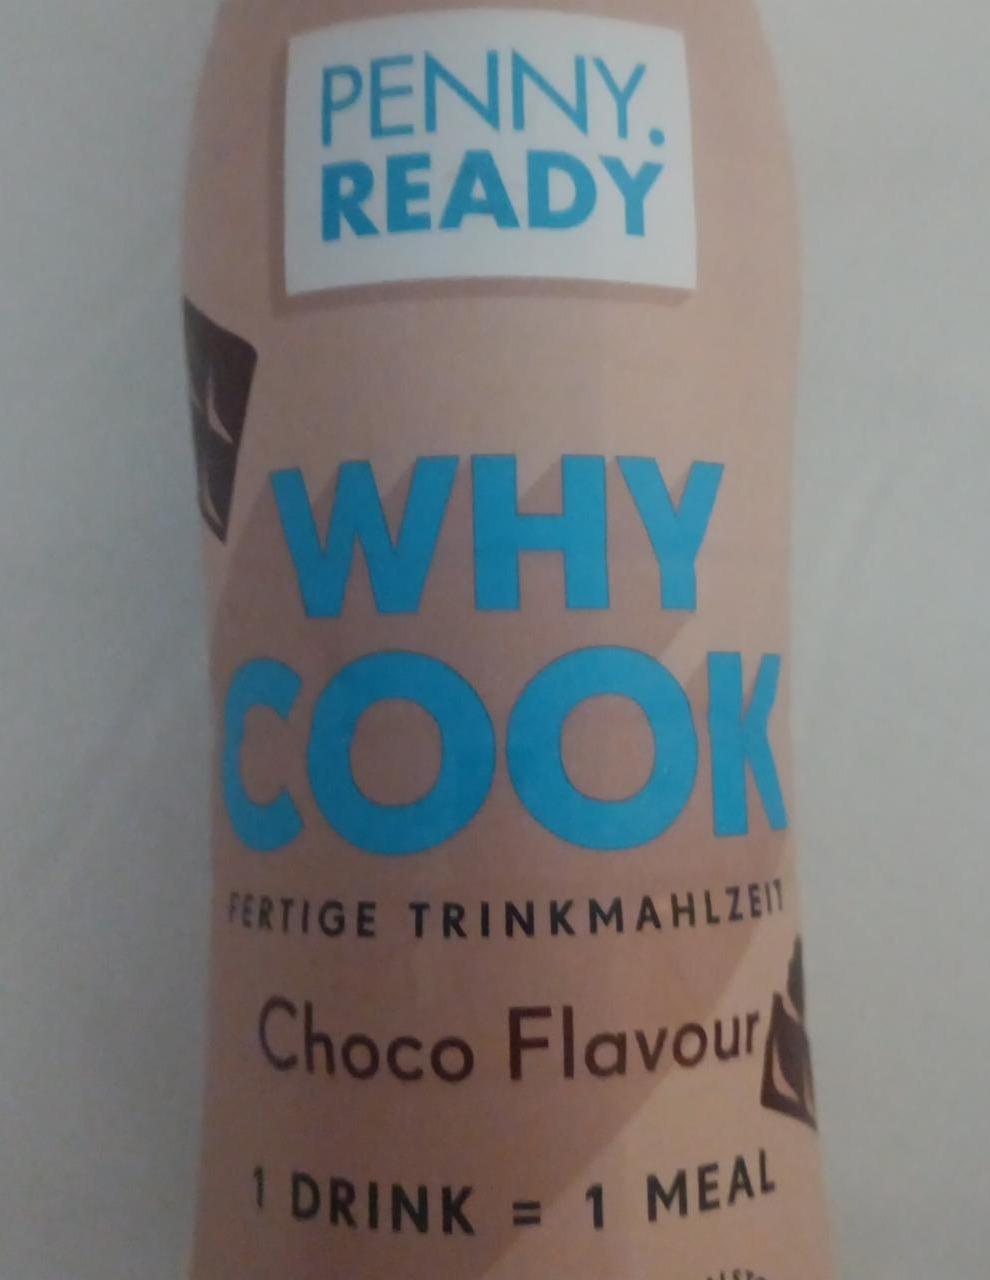 Fotografie - Why Cook Choco Flavour Penny Ready